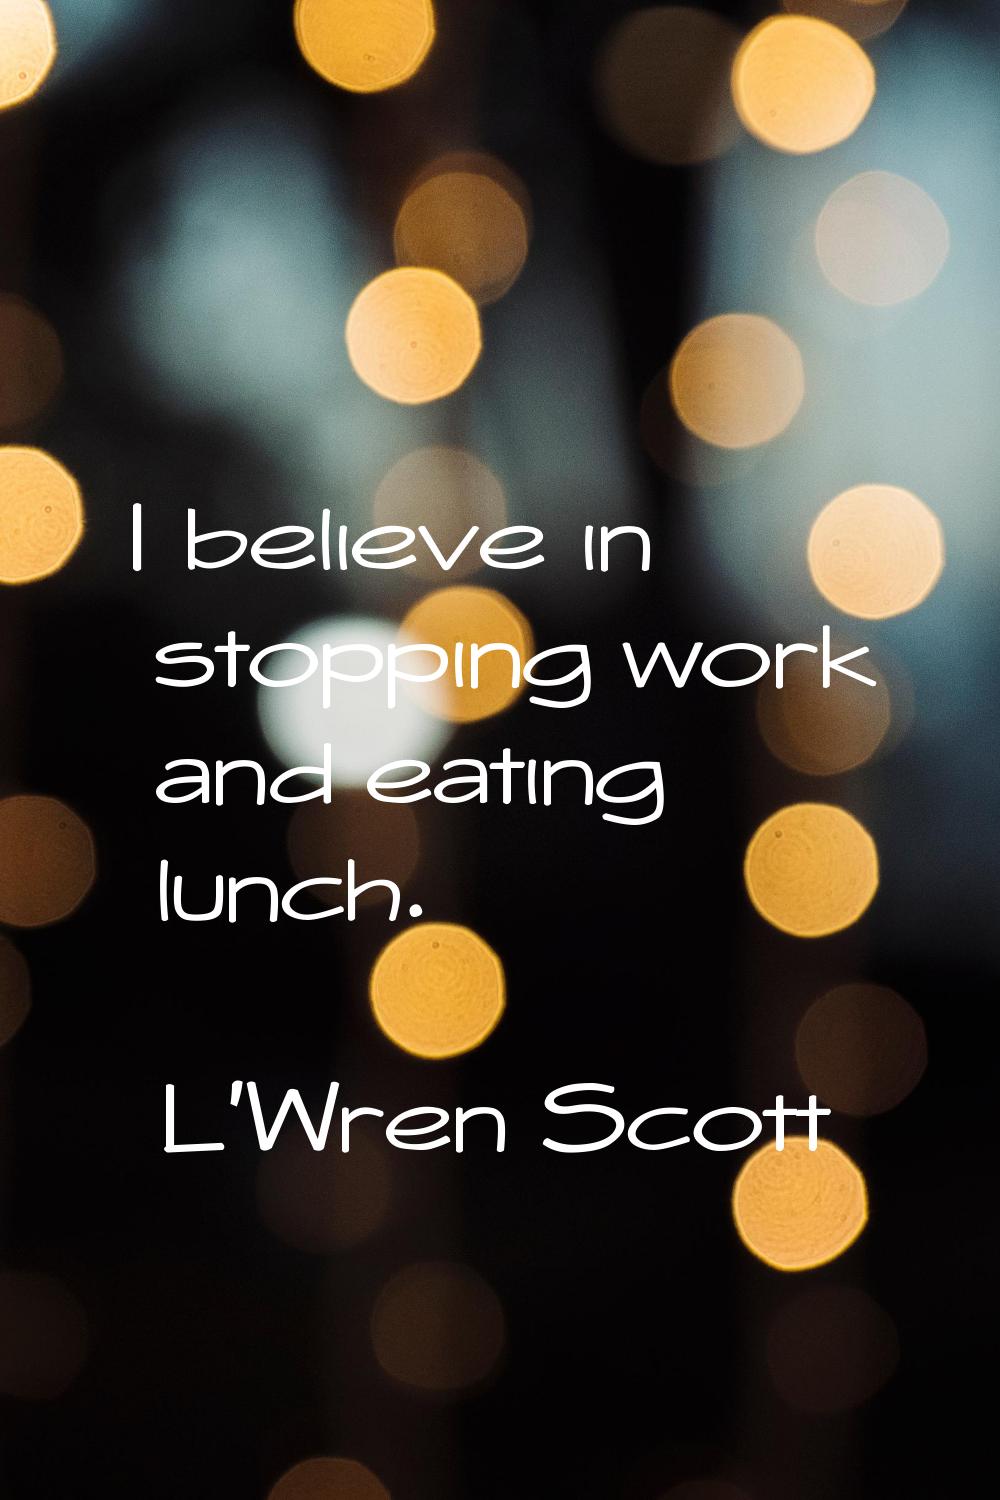 I believe in stopping work and eating lunch.